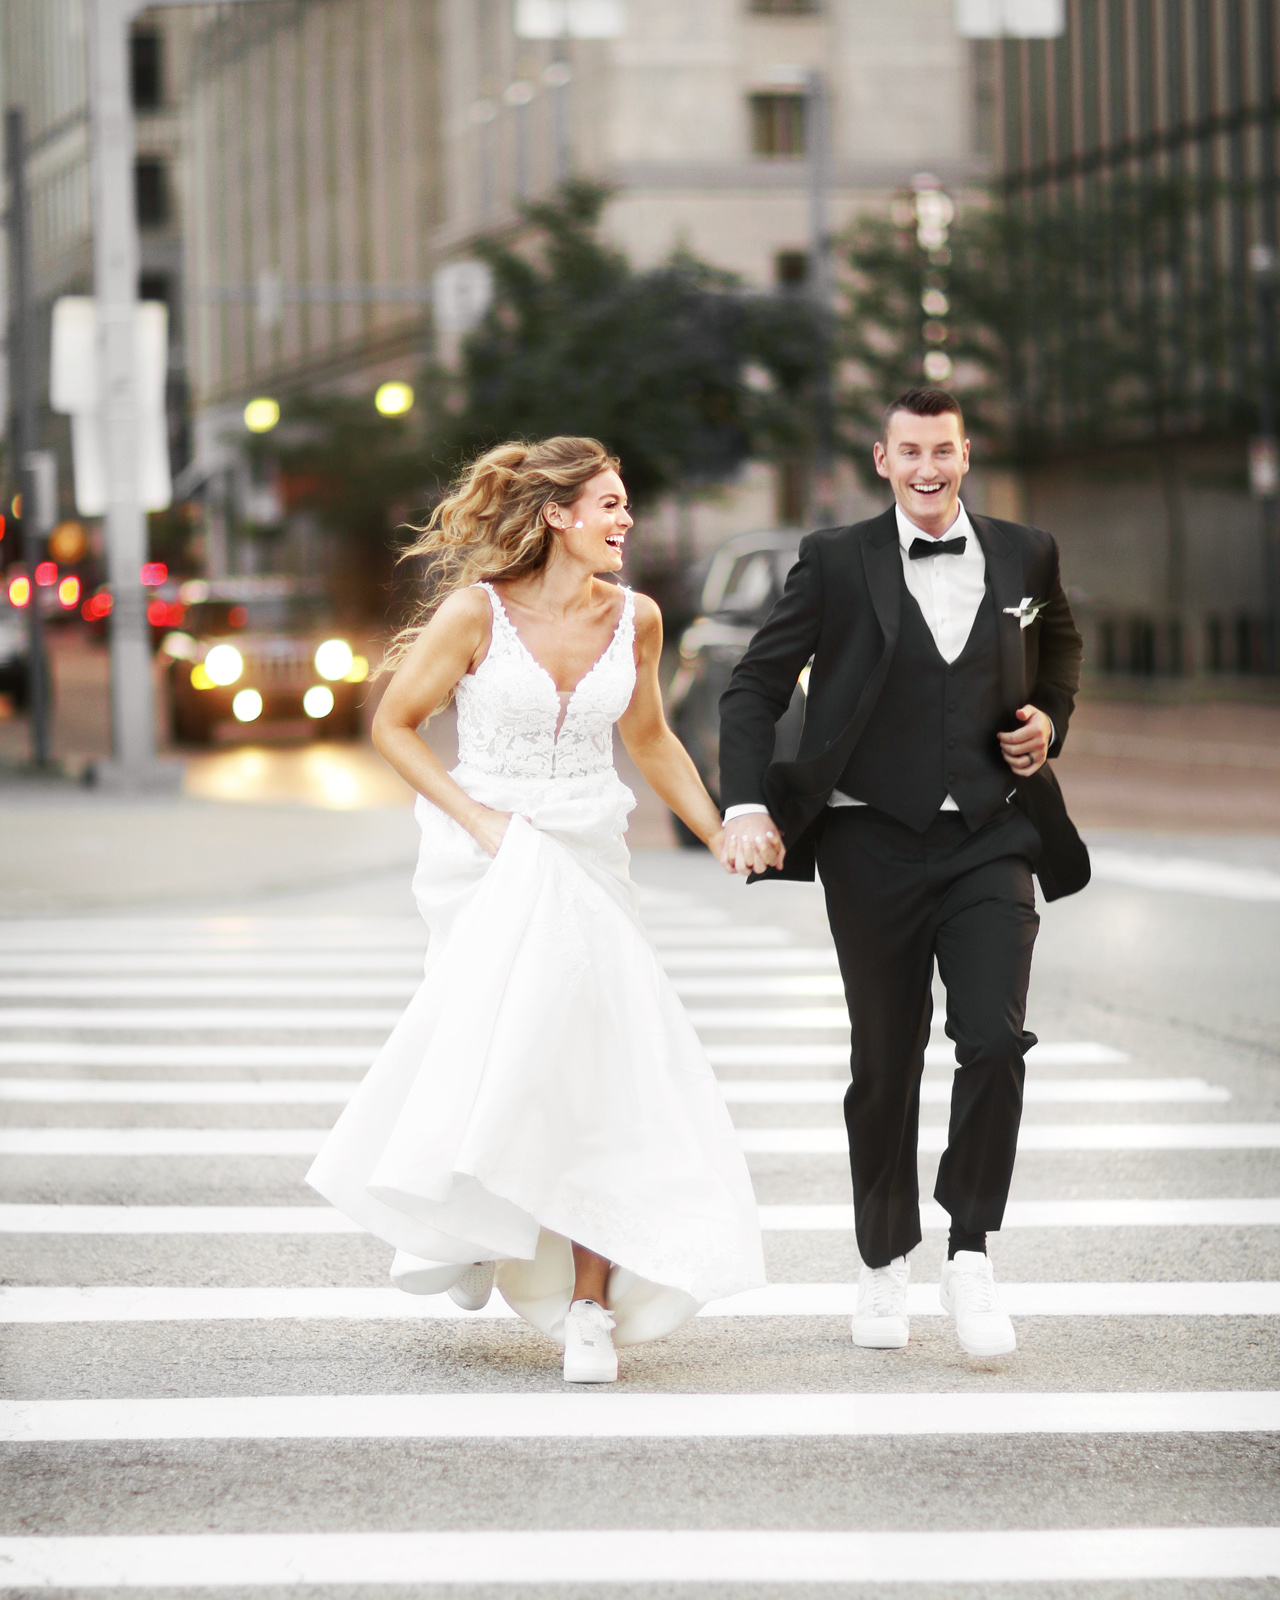 cute picture of bride and groom running across a street in Pittsburgh, PA